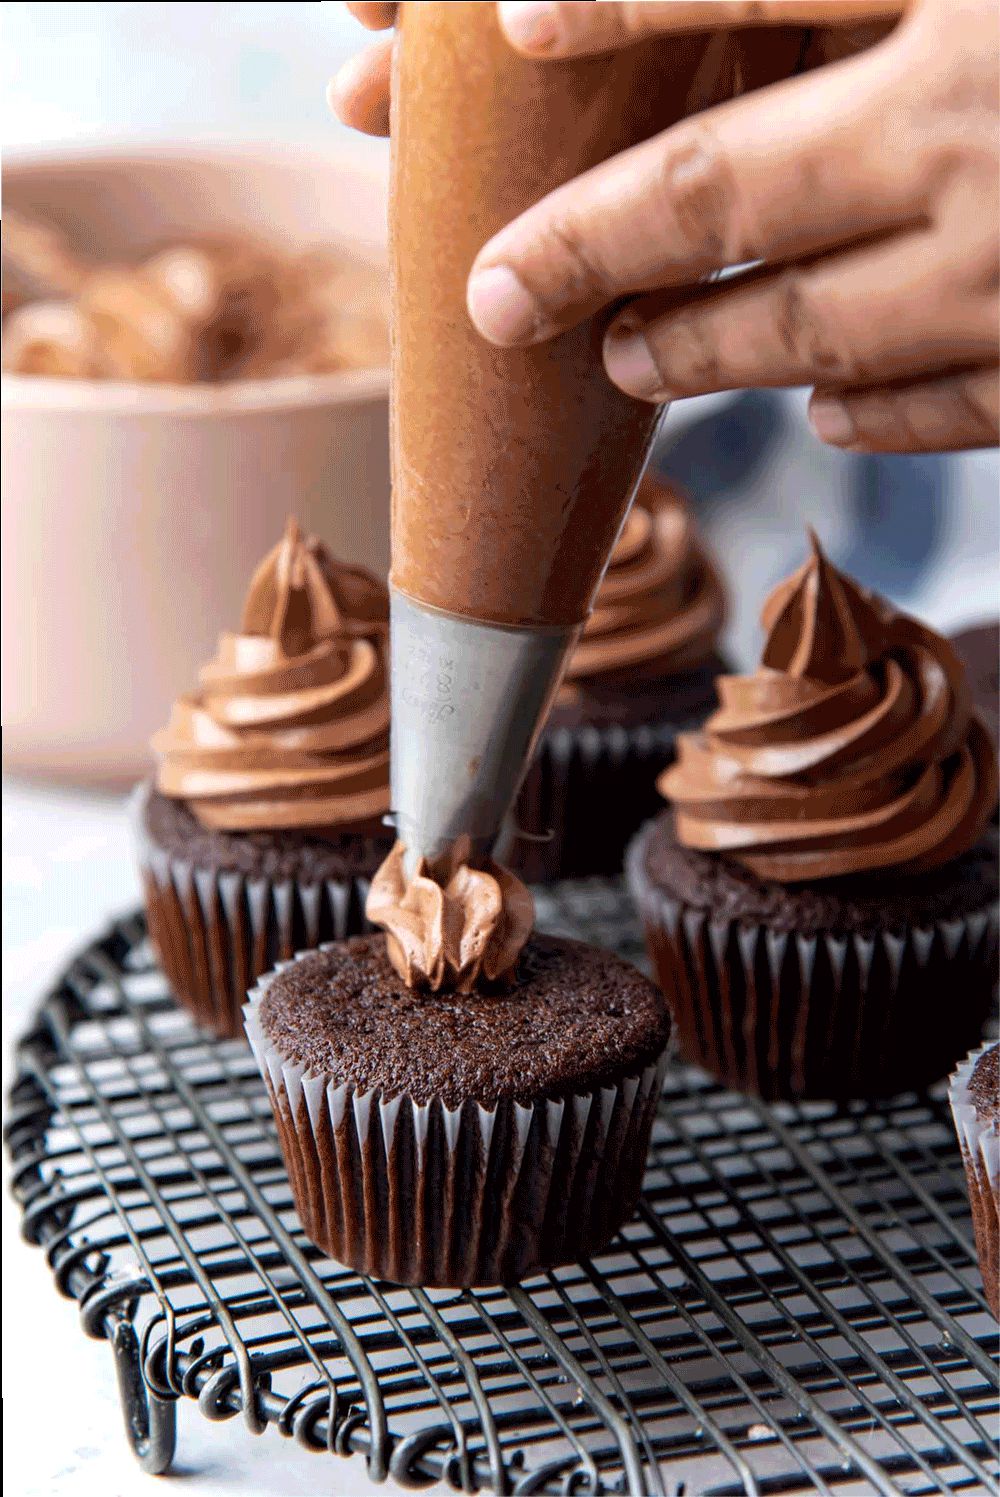 Frosting the chocolate cupcakes